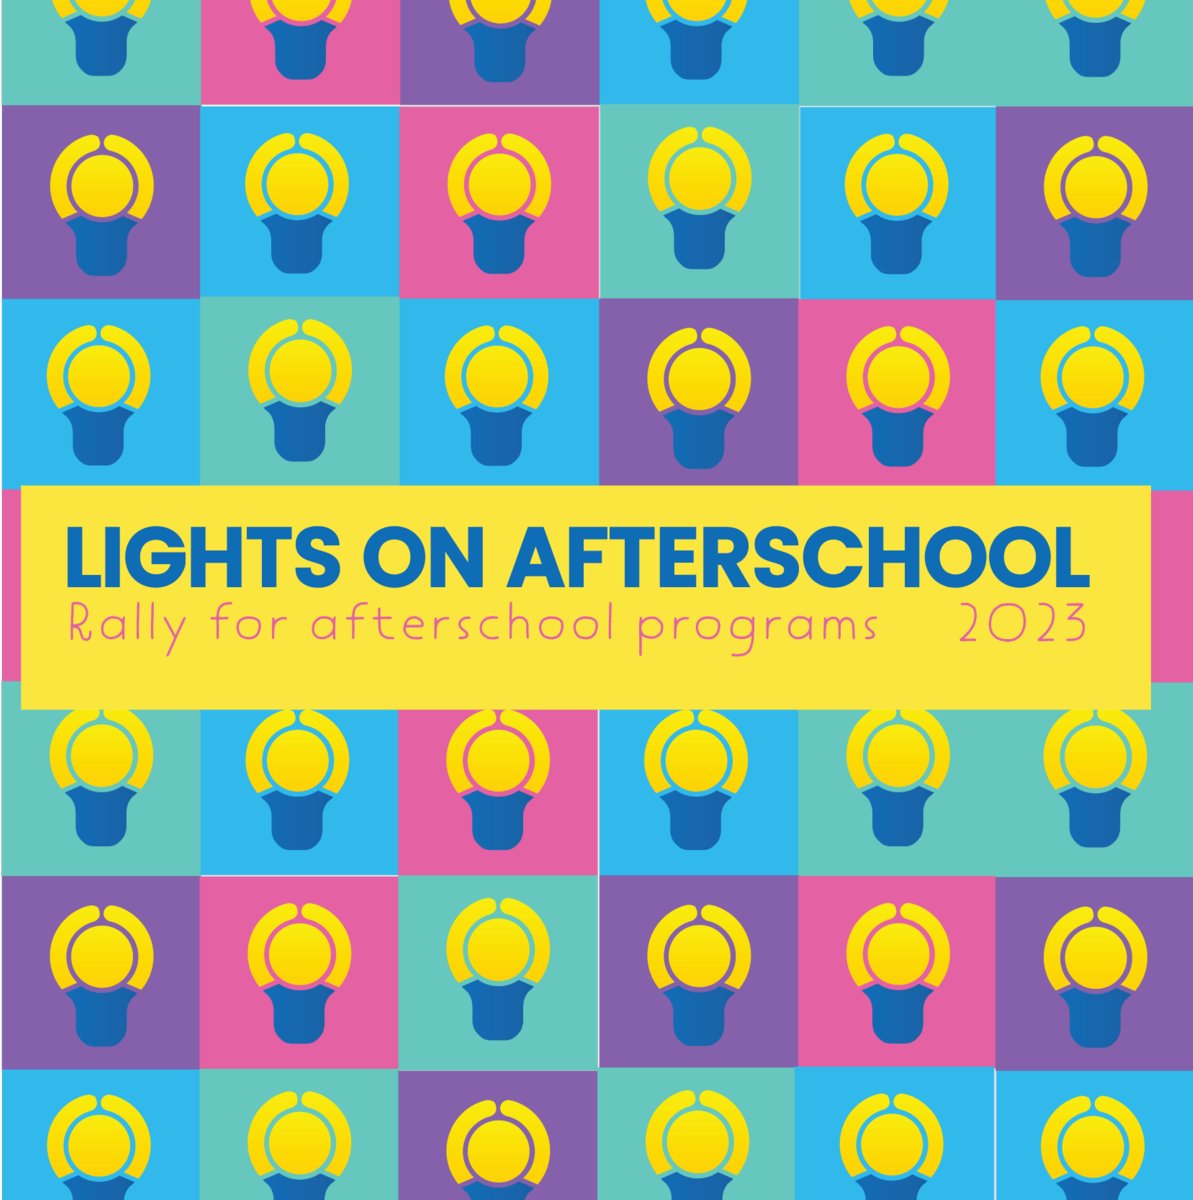 It’s on! We’re celebrating the 24th annual #LightsOnAfterschool with over 1 million afterschool champions to showcase all the ways afterschool programs are serving our communities – now and in the future! Join the celebration: afterschoolalliance.org/loa.cfm